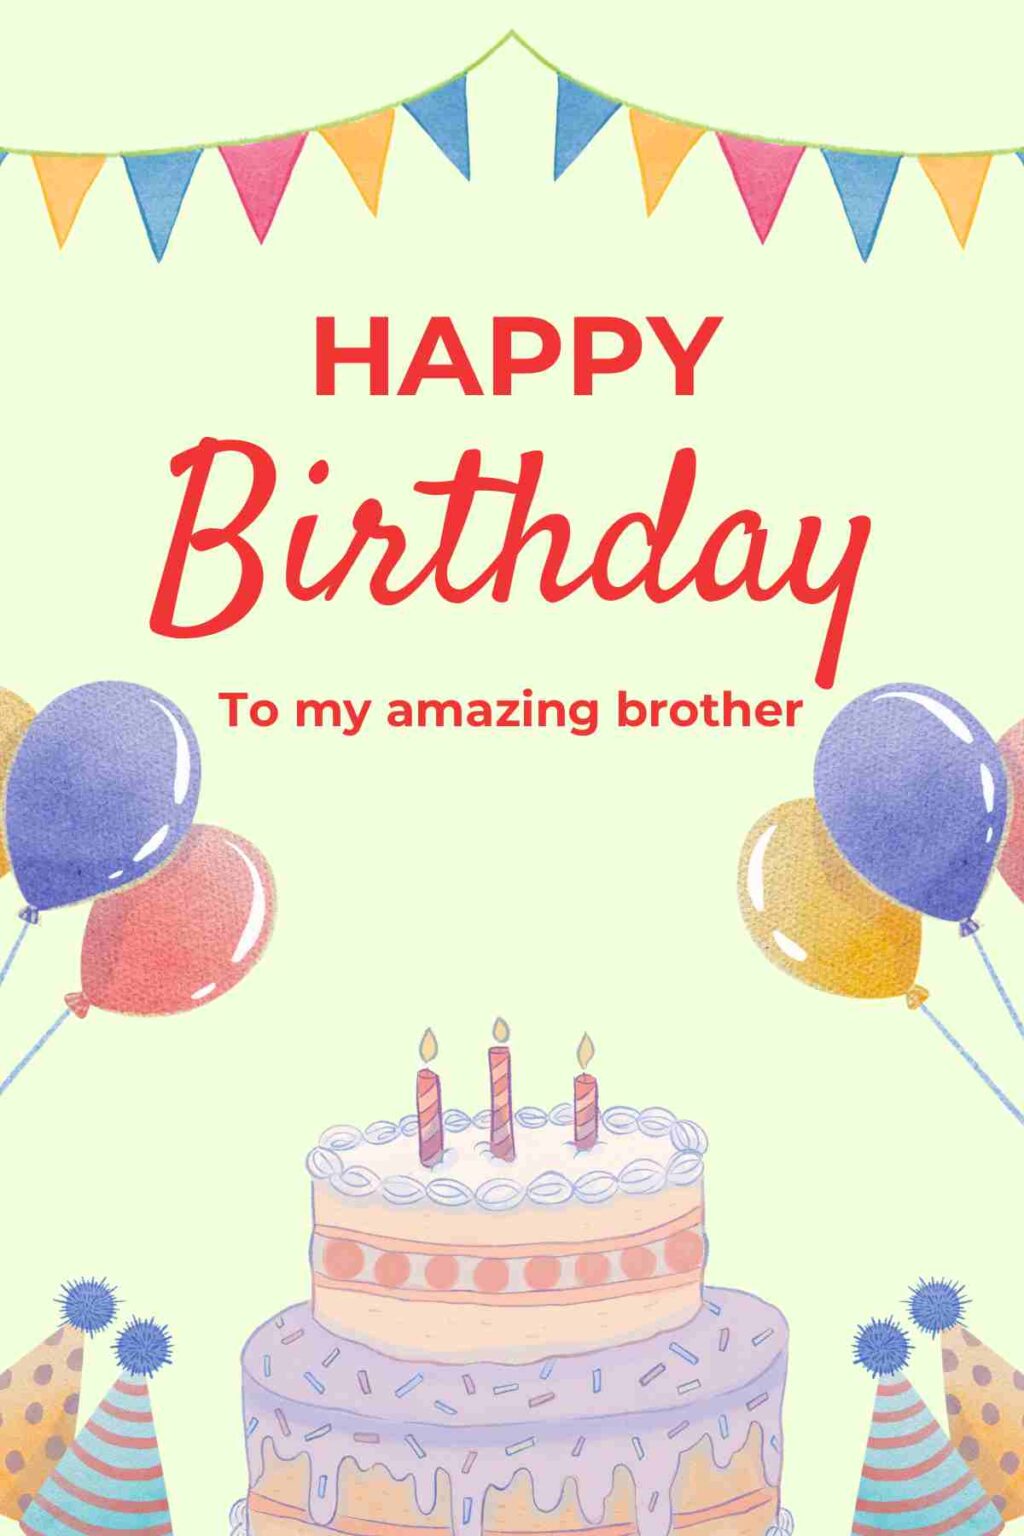 45+ Birthday Wishes for your Brother: Touching Messages & Quotes ...